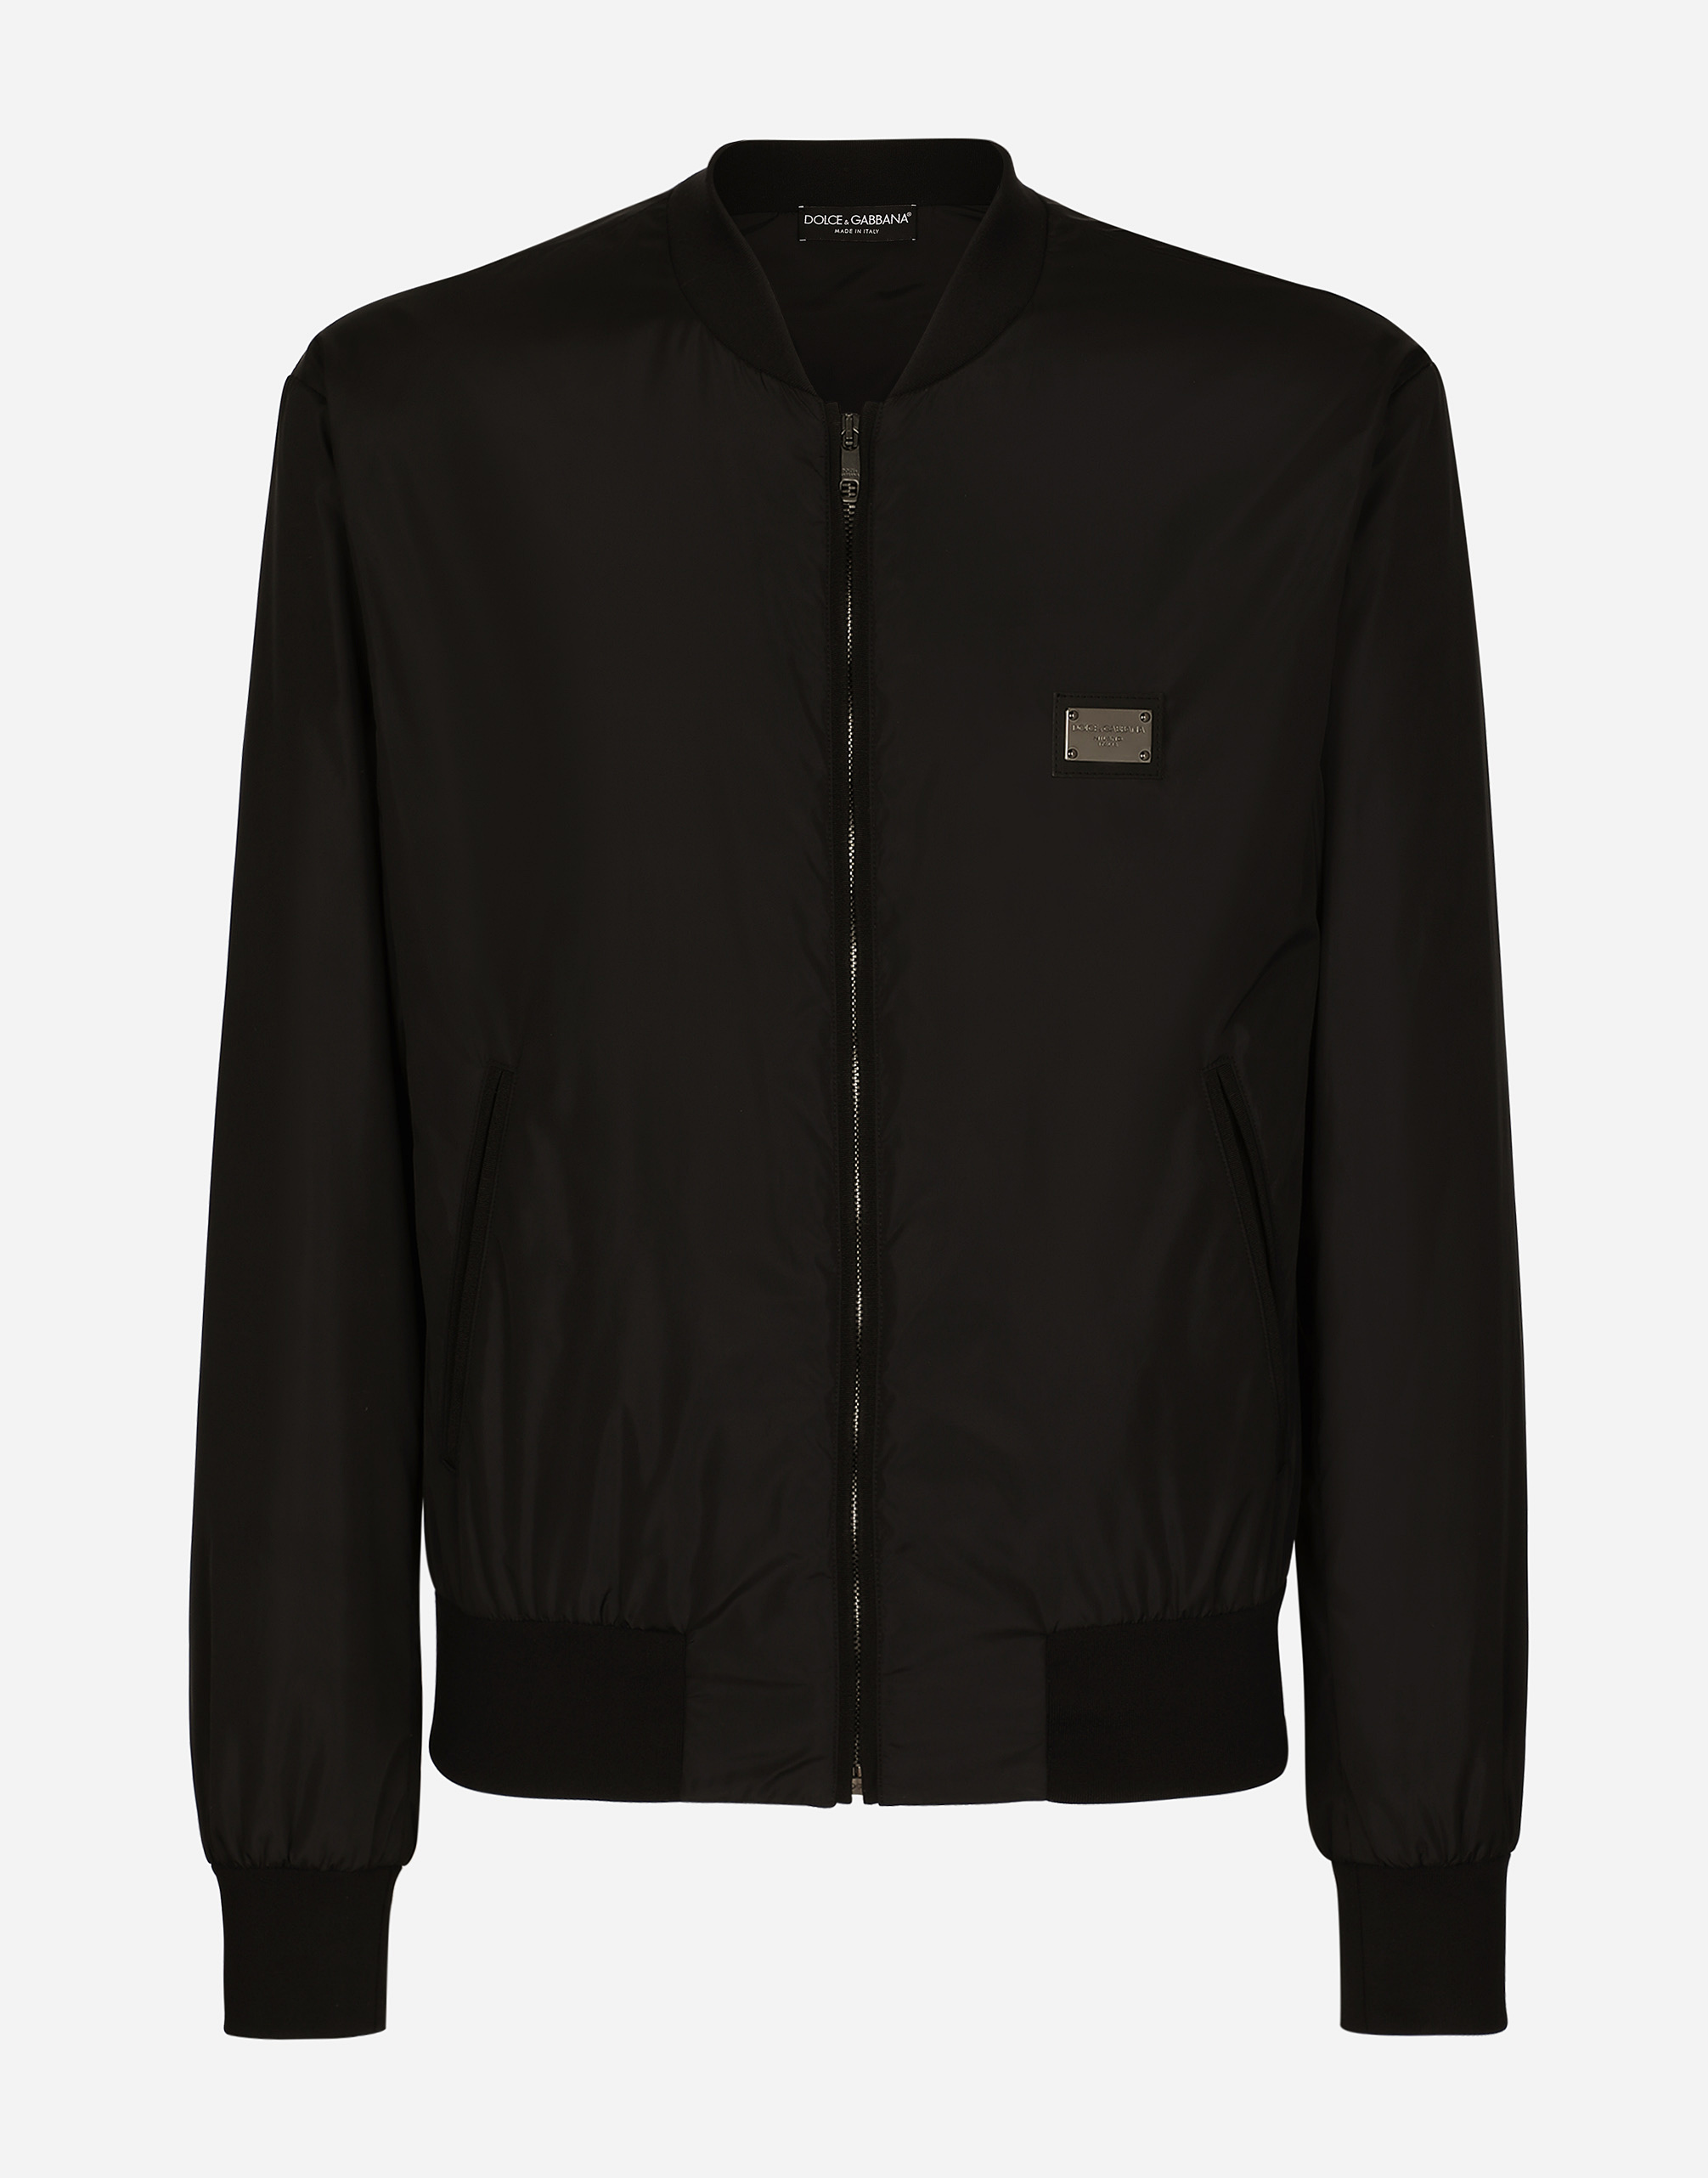 Nylon jacket with branded tag